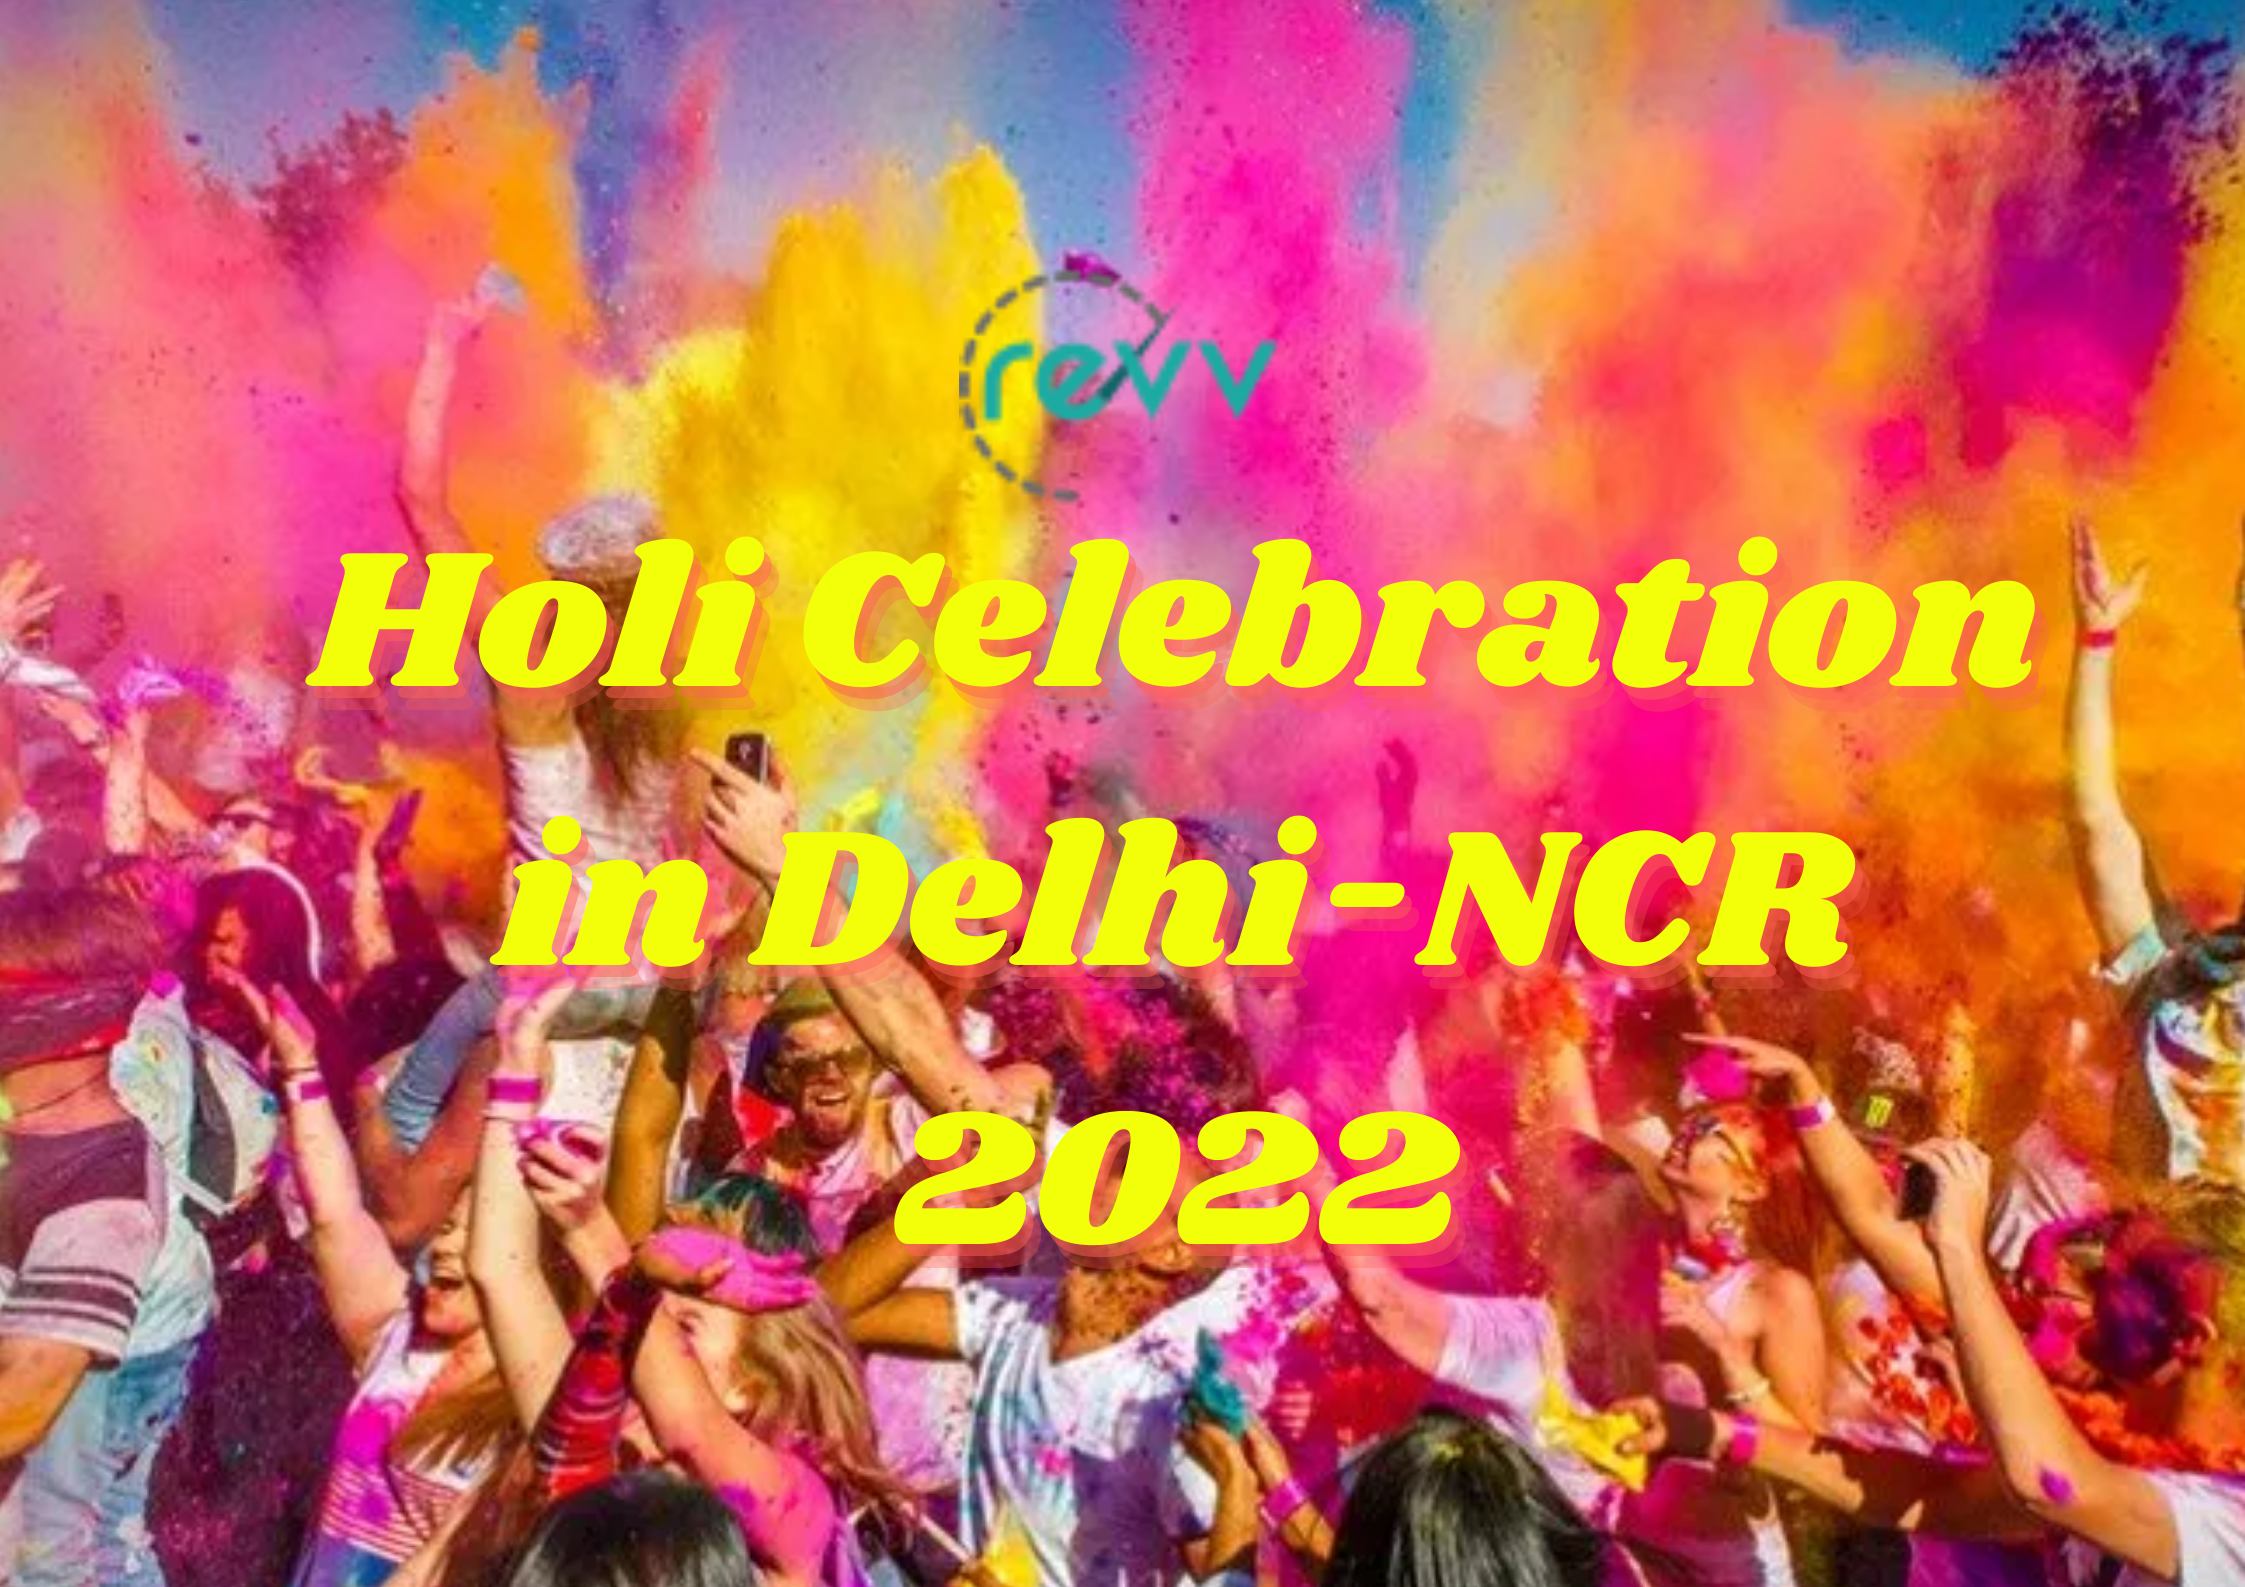 7 things you didn't know about the fabulously colourful Holi Festival